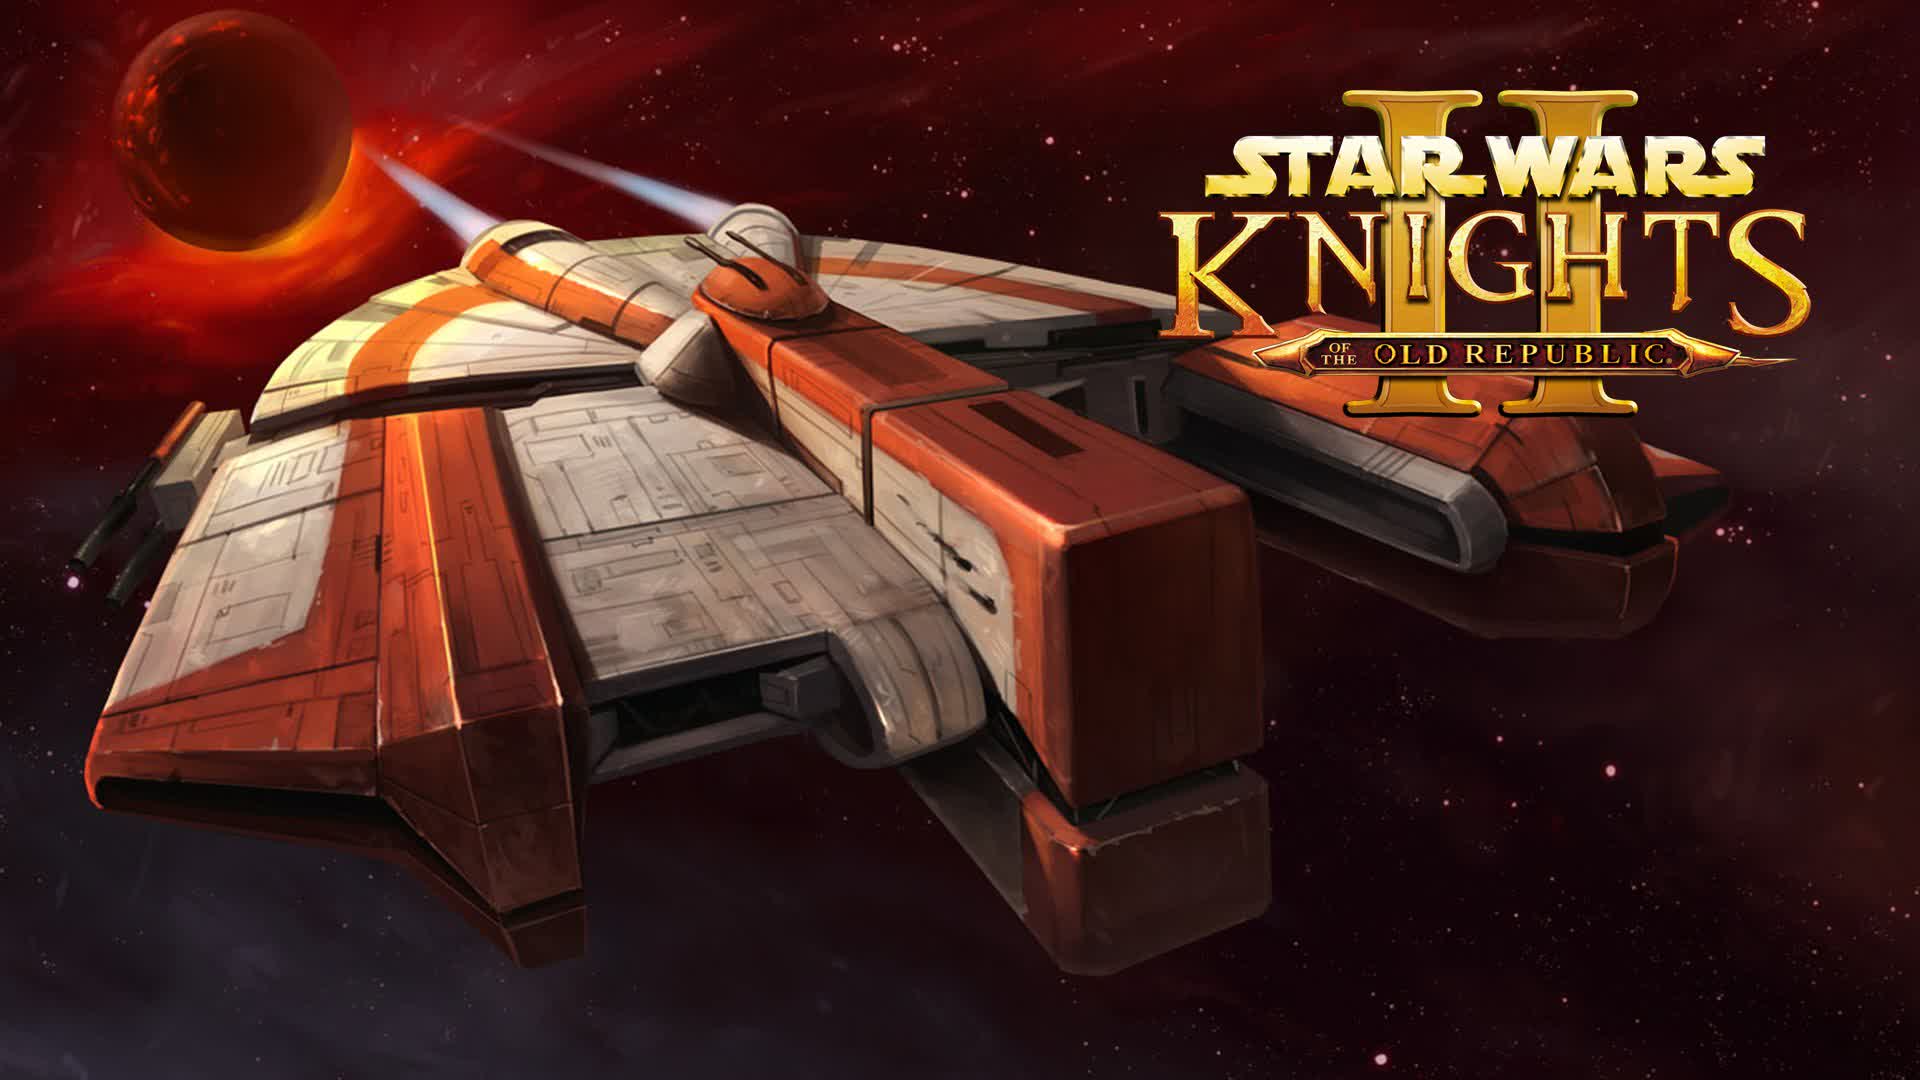 Classic Star Wars RPG 'KOTOR II' comes to Android and iOS on December 18